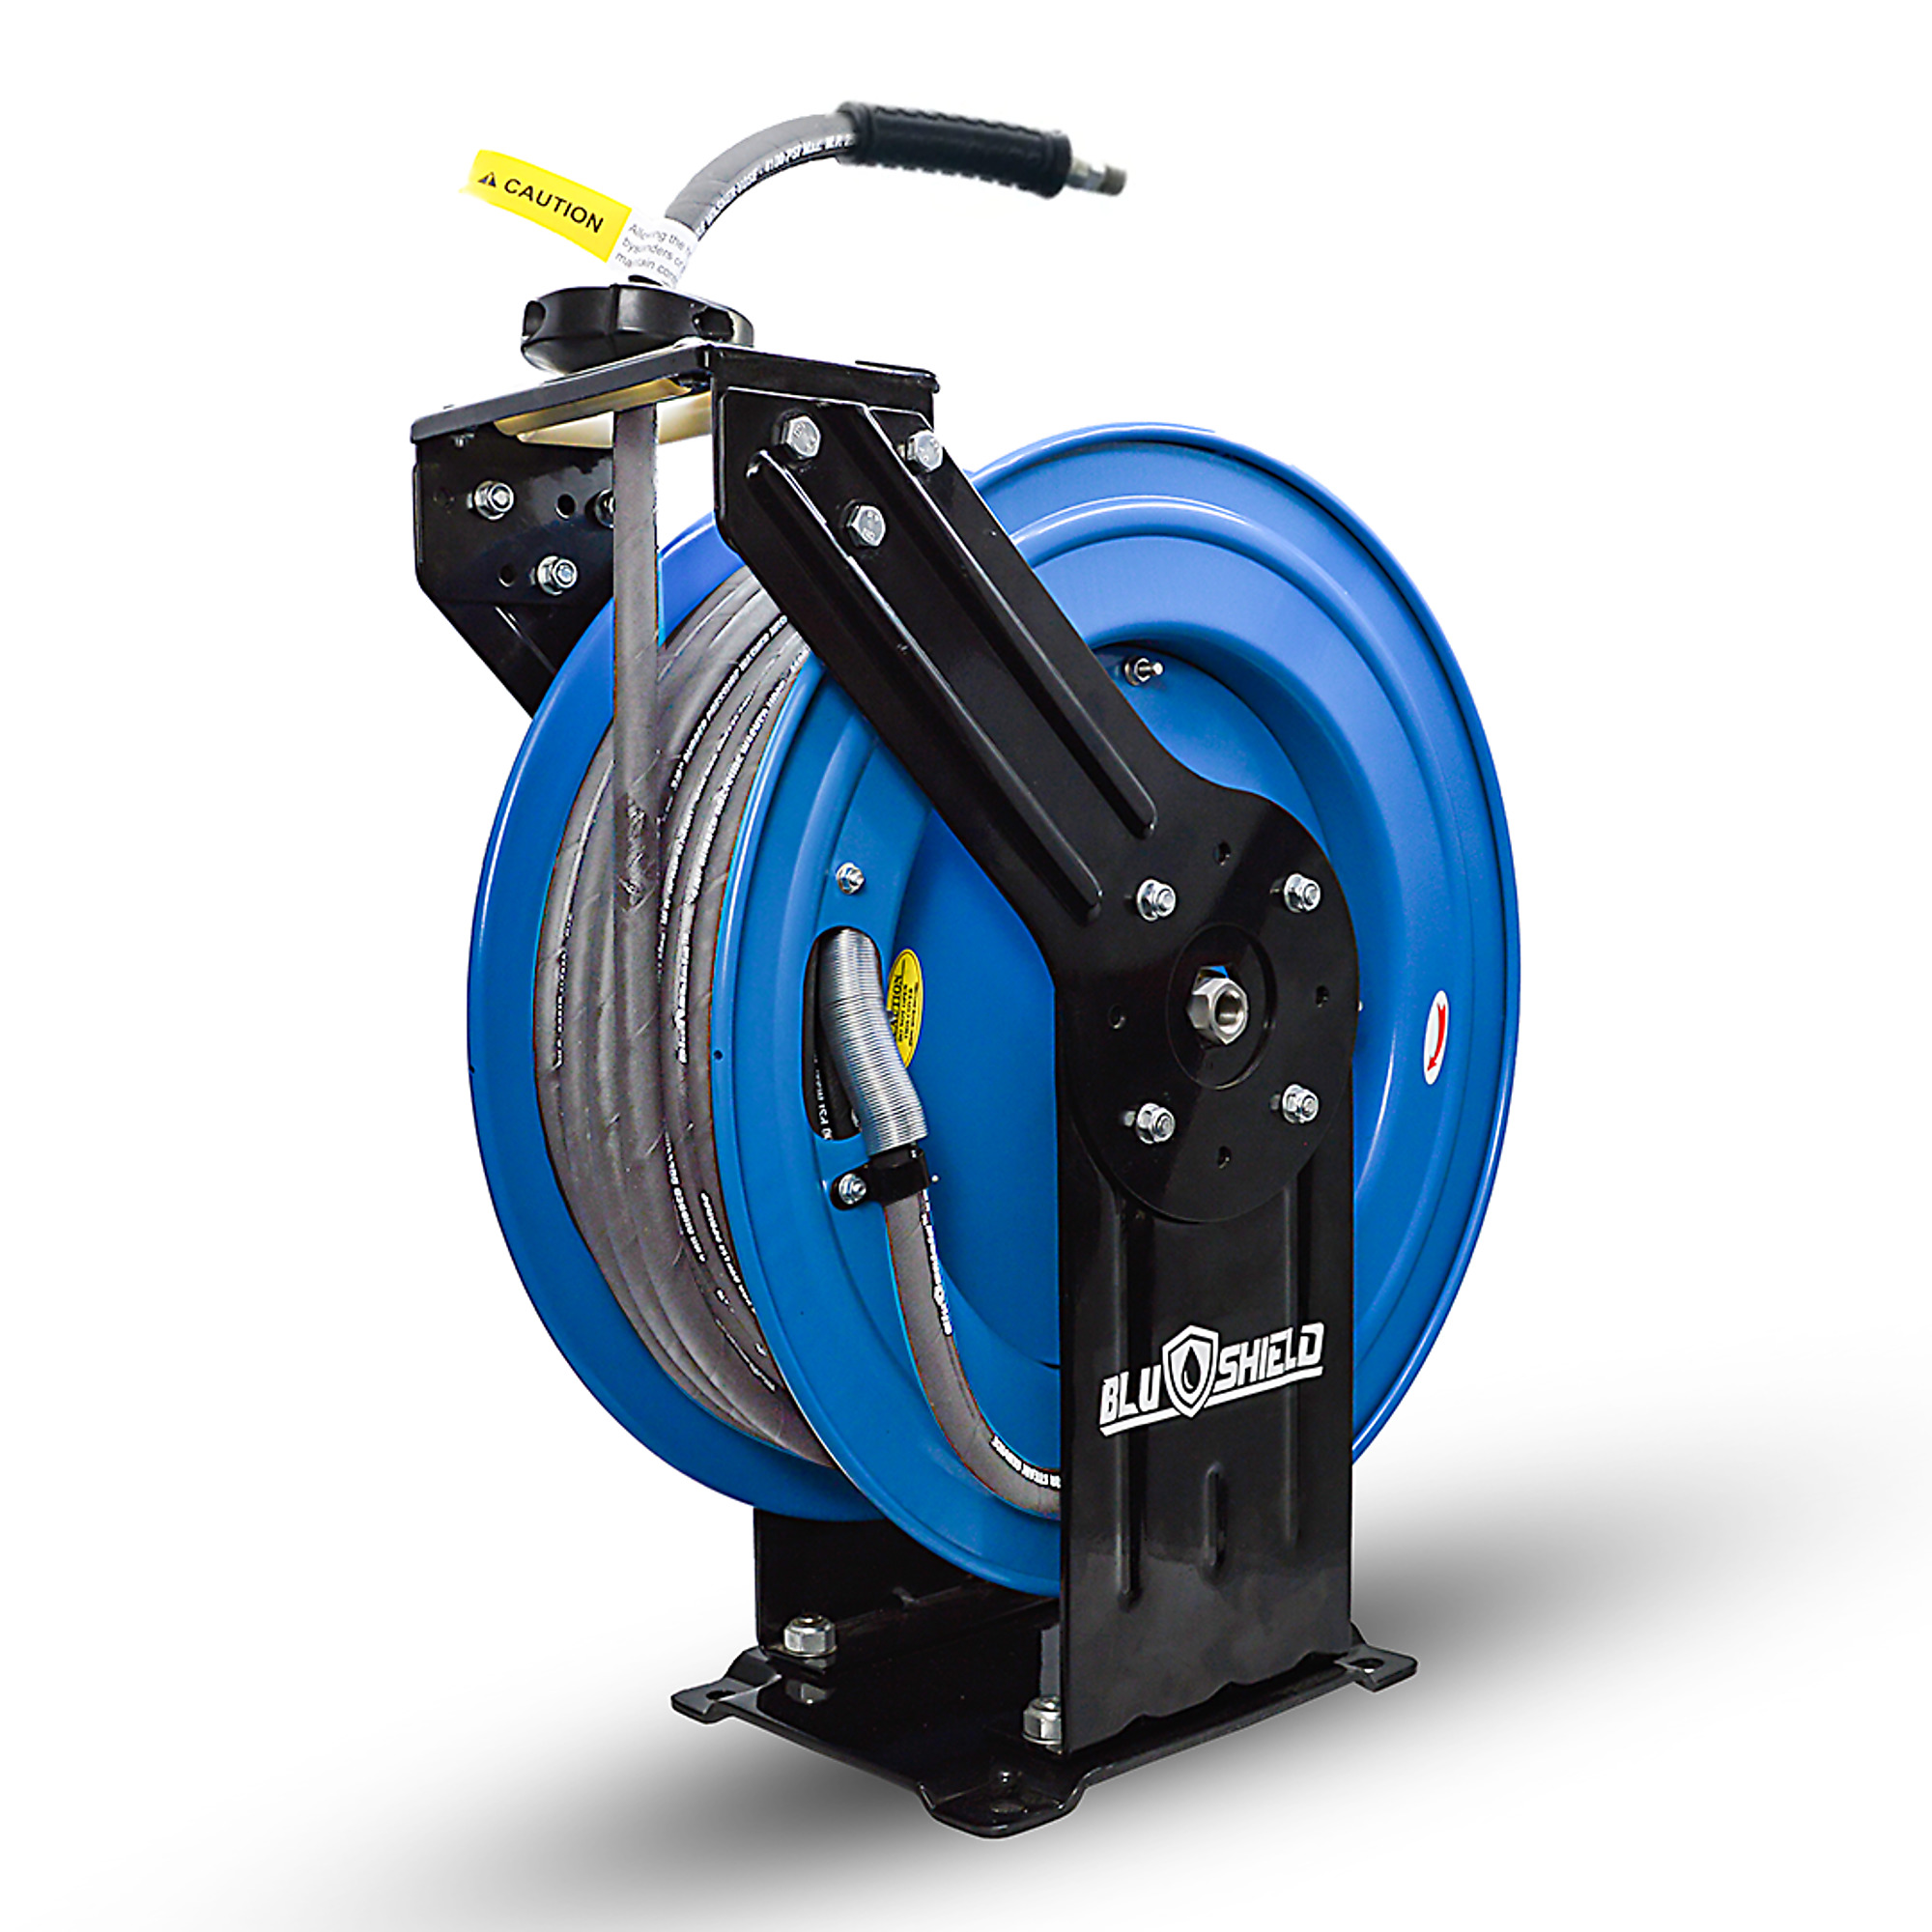 BluShield, PW Non- Marking Hose Reel 3/8Inch x 100ft., Hose Length Capacity 100 ft, Max. Pressure 4100 PSI, Model PWR38100-31-NM